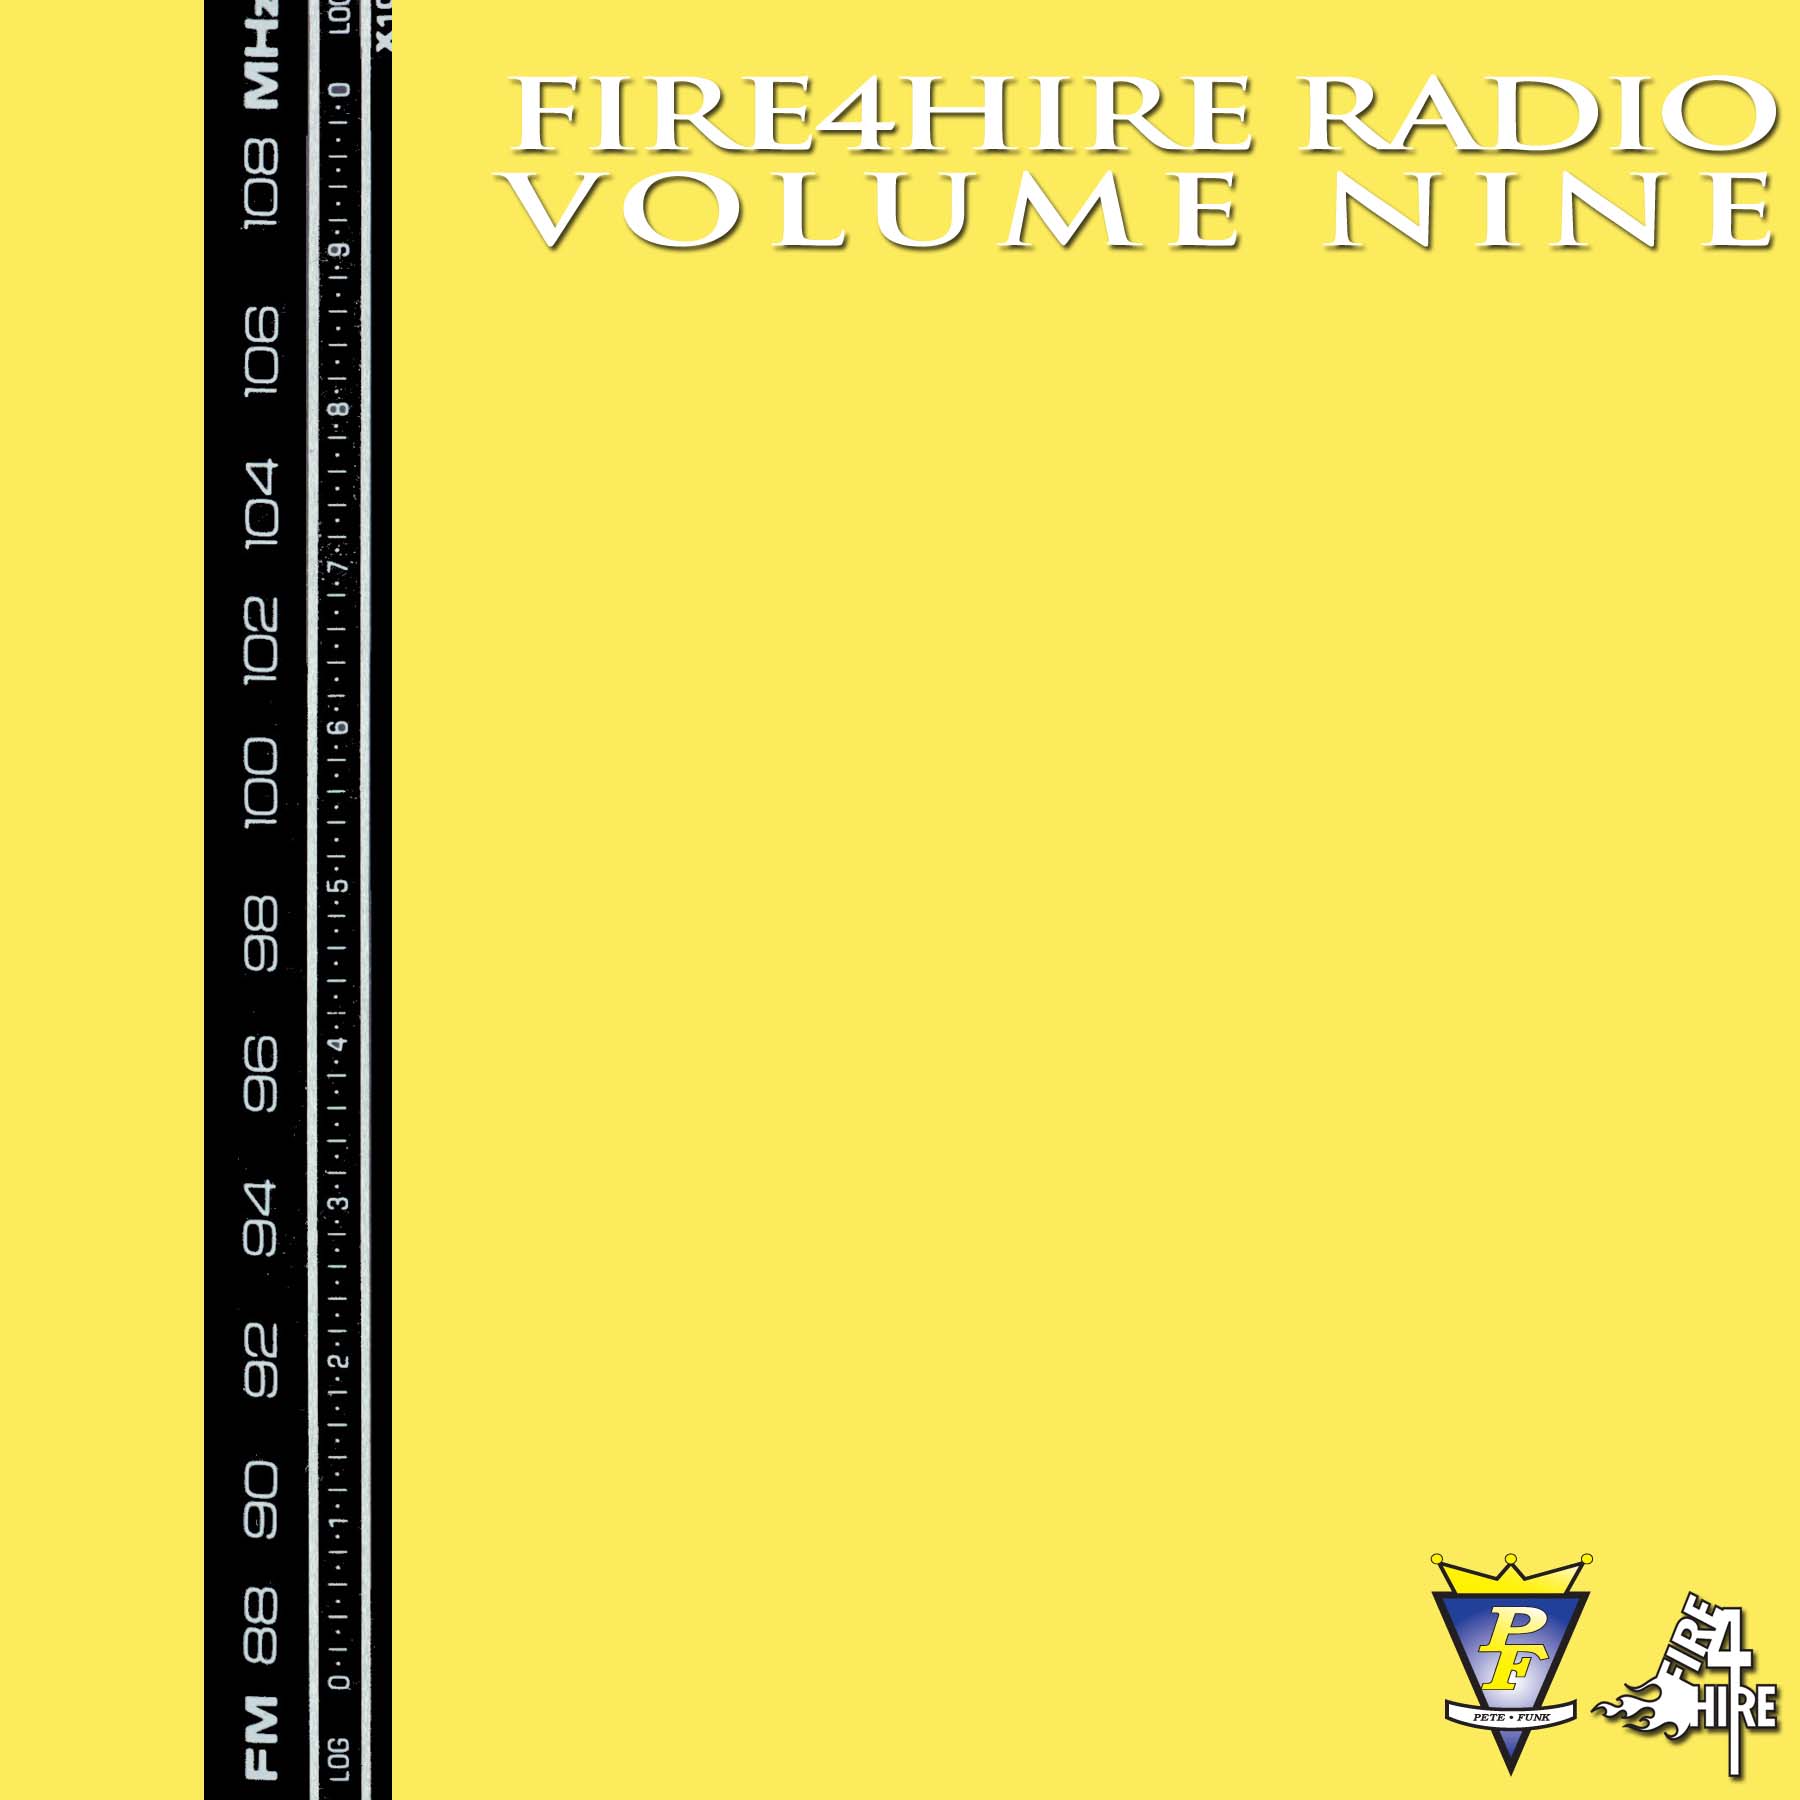 Fire 4 Hire Radio Vol. 9 mixed by Pete Funk